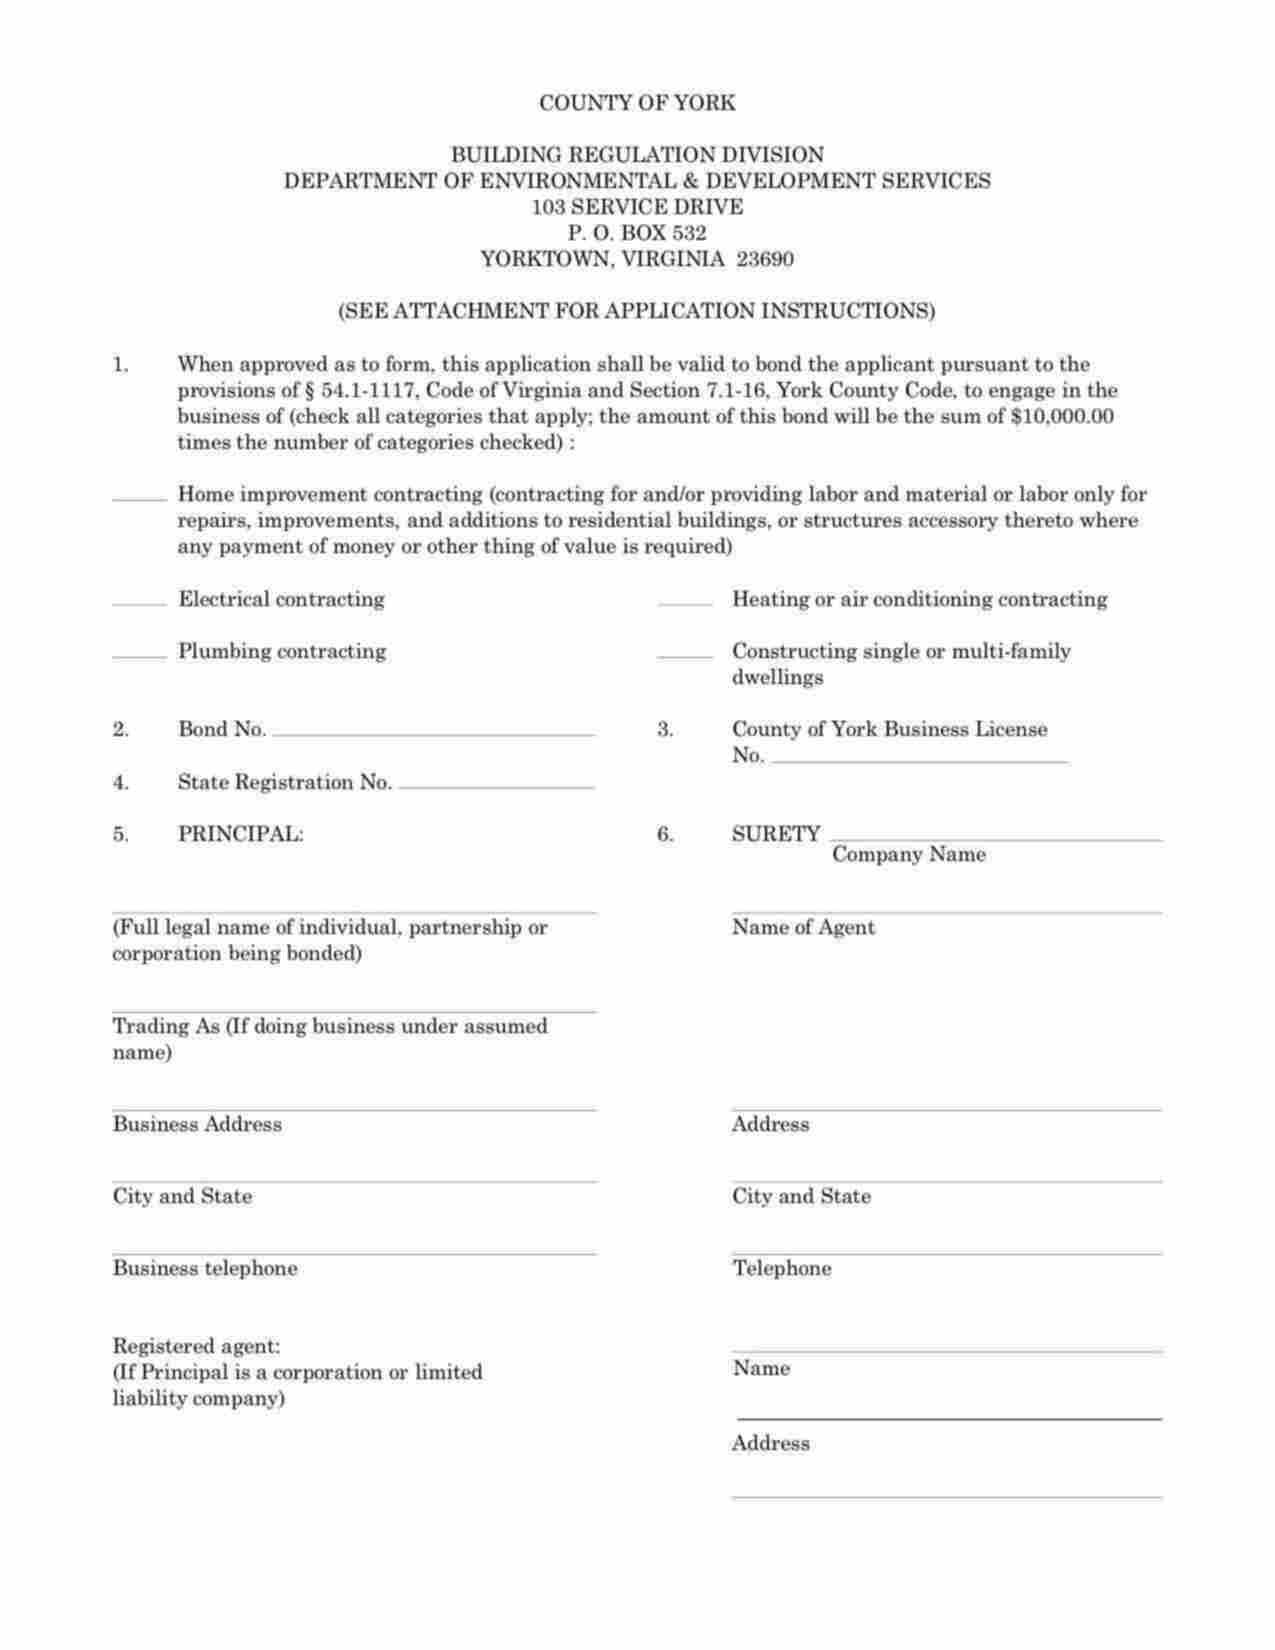 Virginia Heating or Air Conditioning Contracting Bond Form